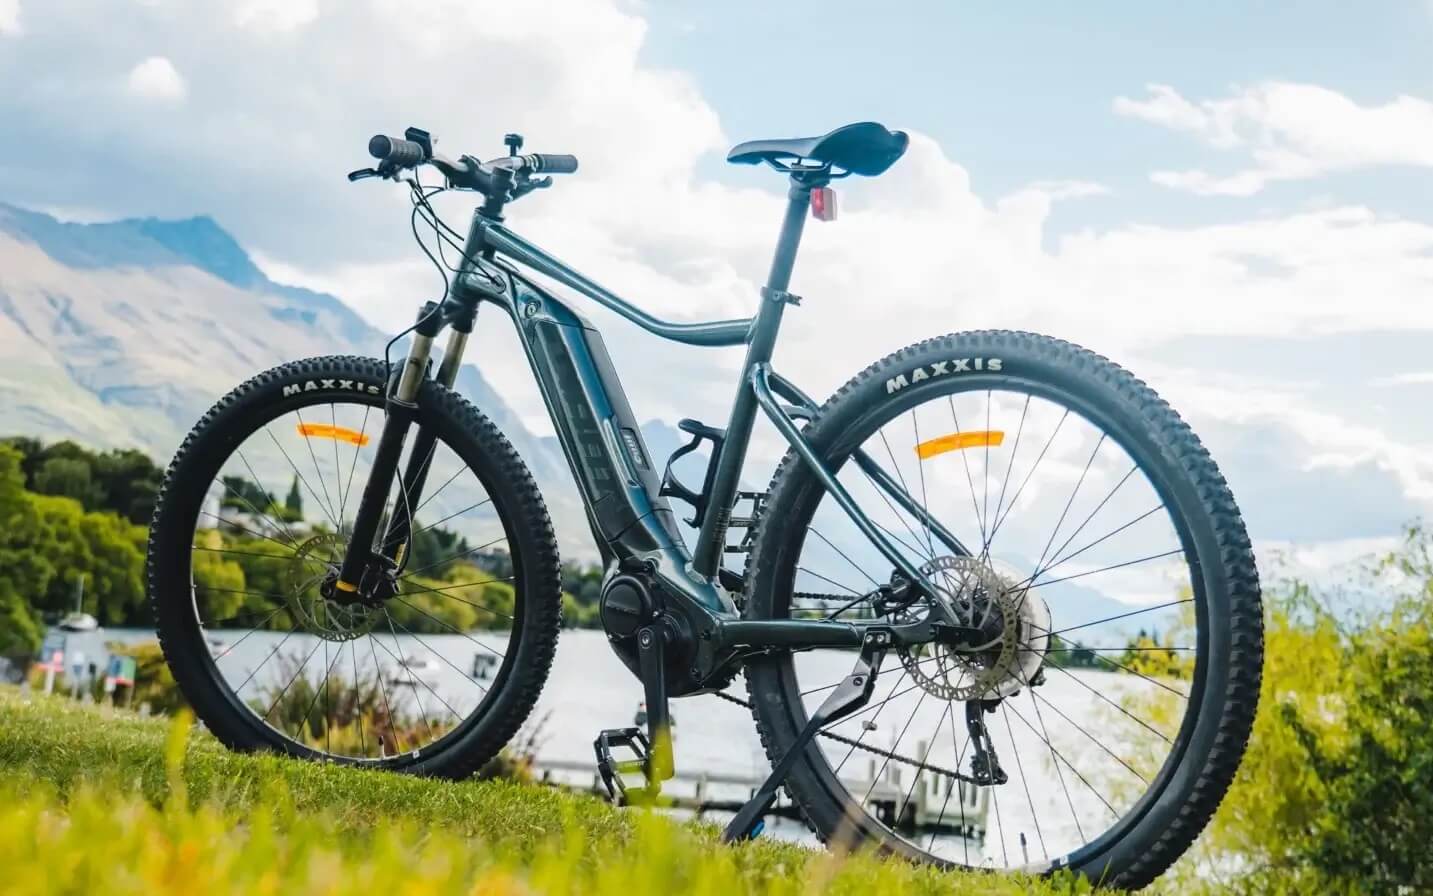 Great value Queenstown ebike hire.